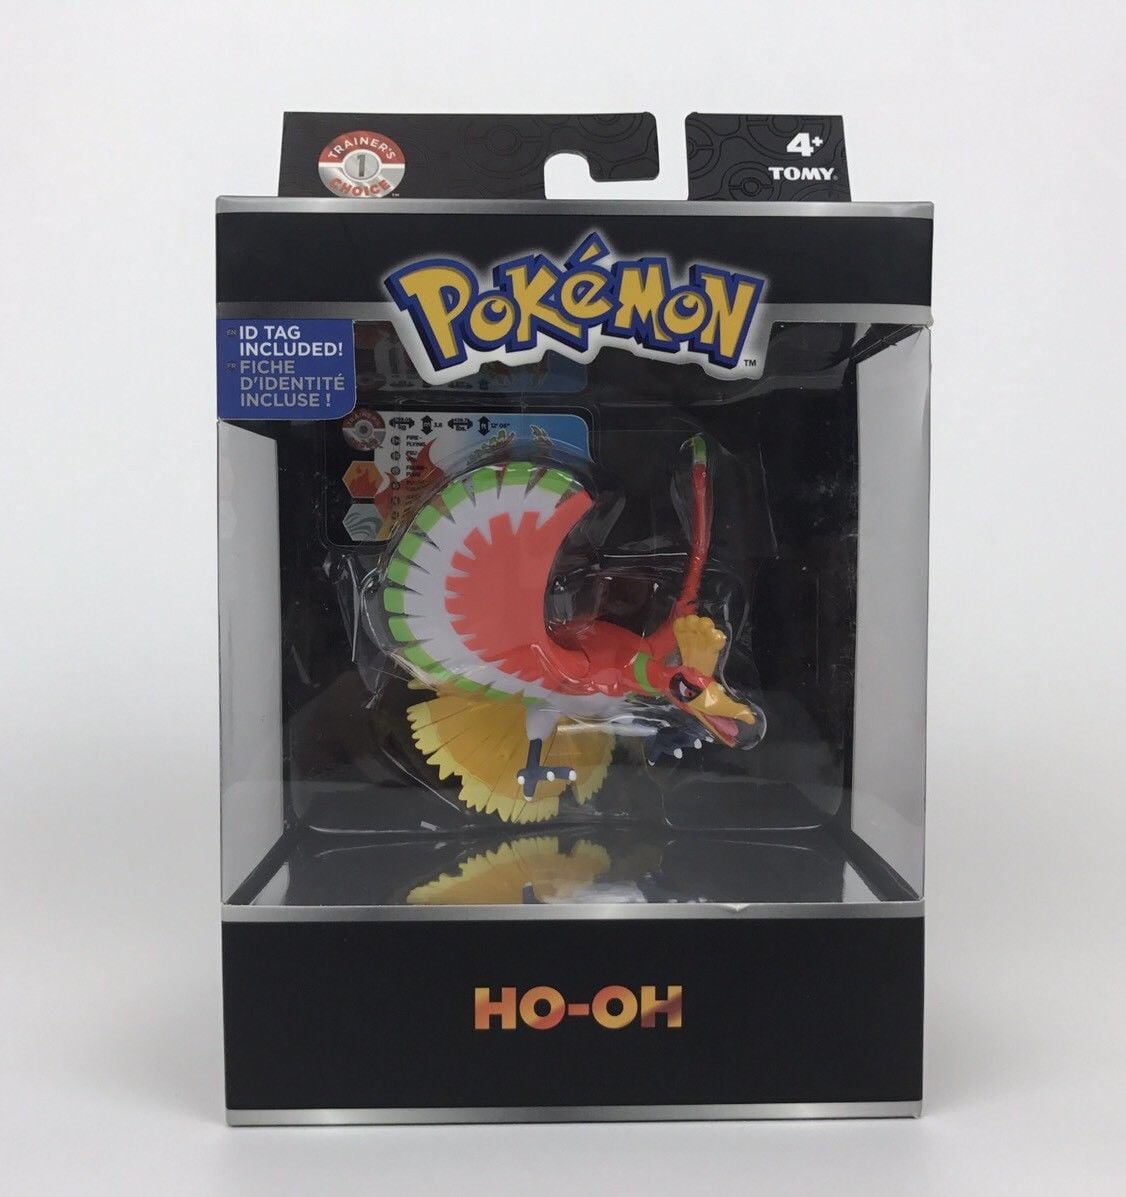 TOMY 2017 Pokemon Ho-oh Lugia Figures 4 Years and up for sale online